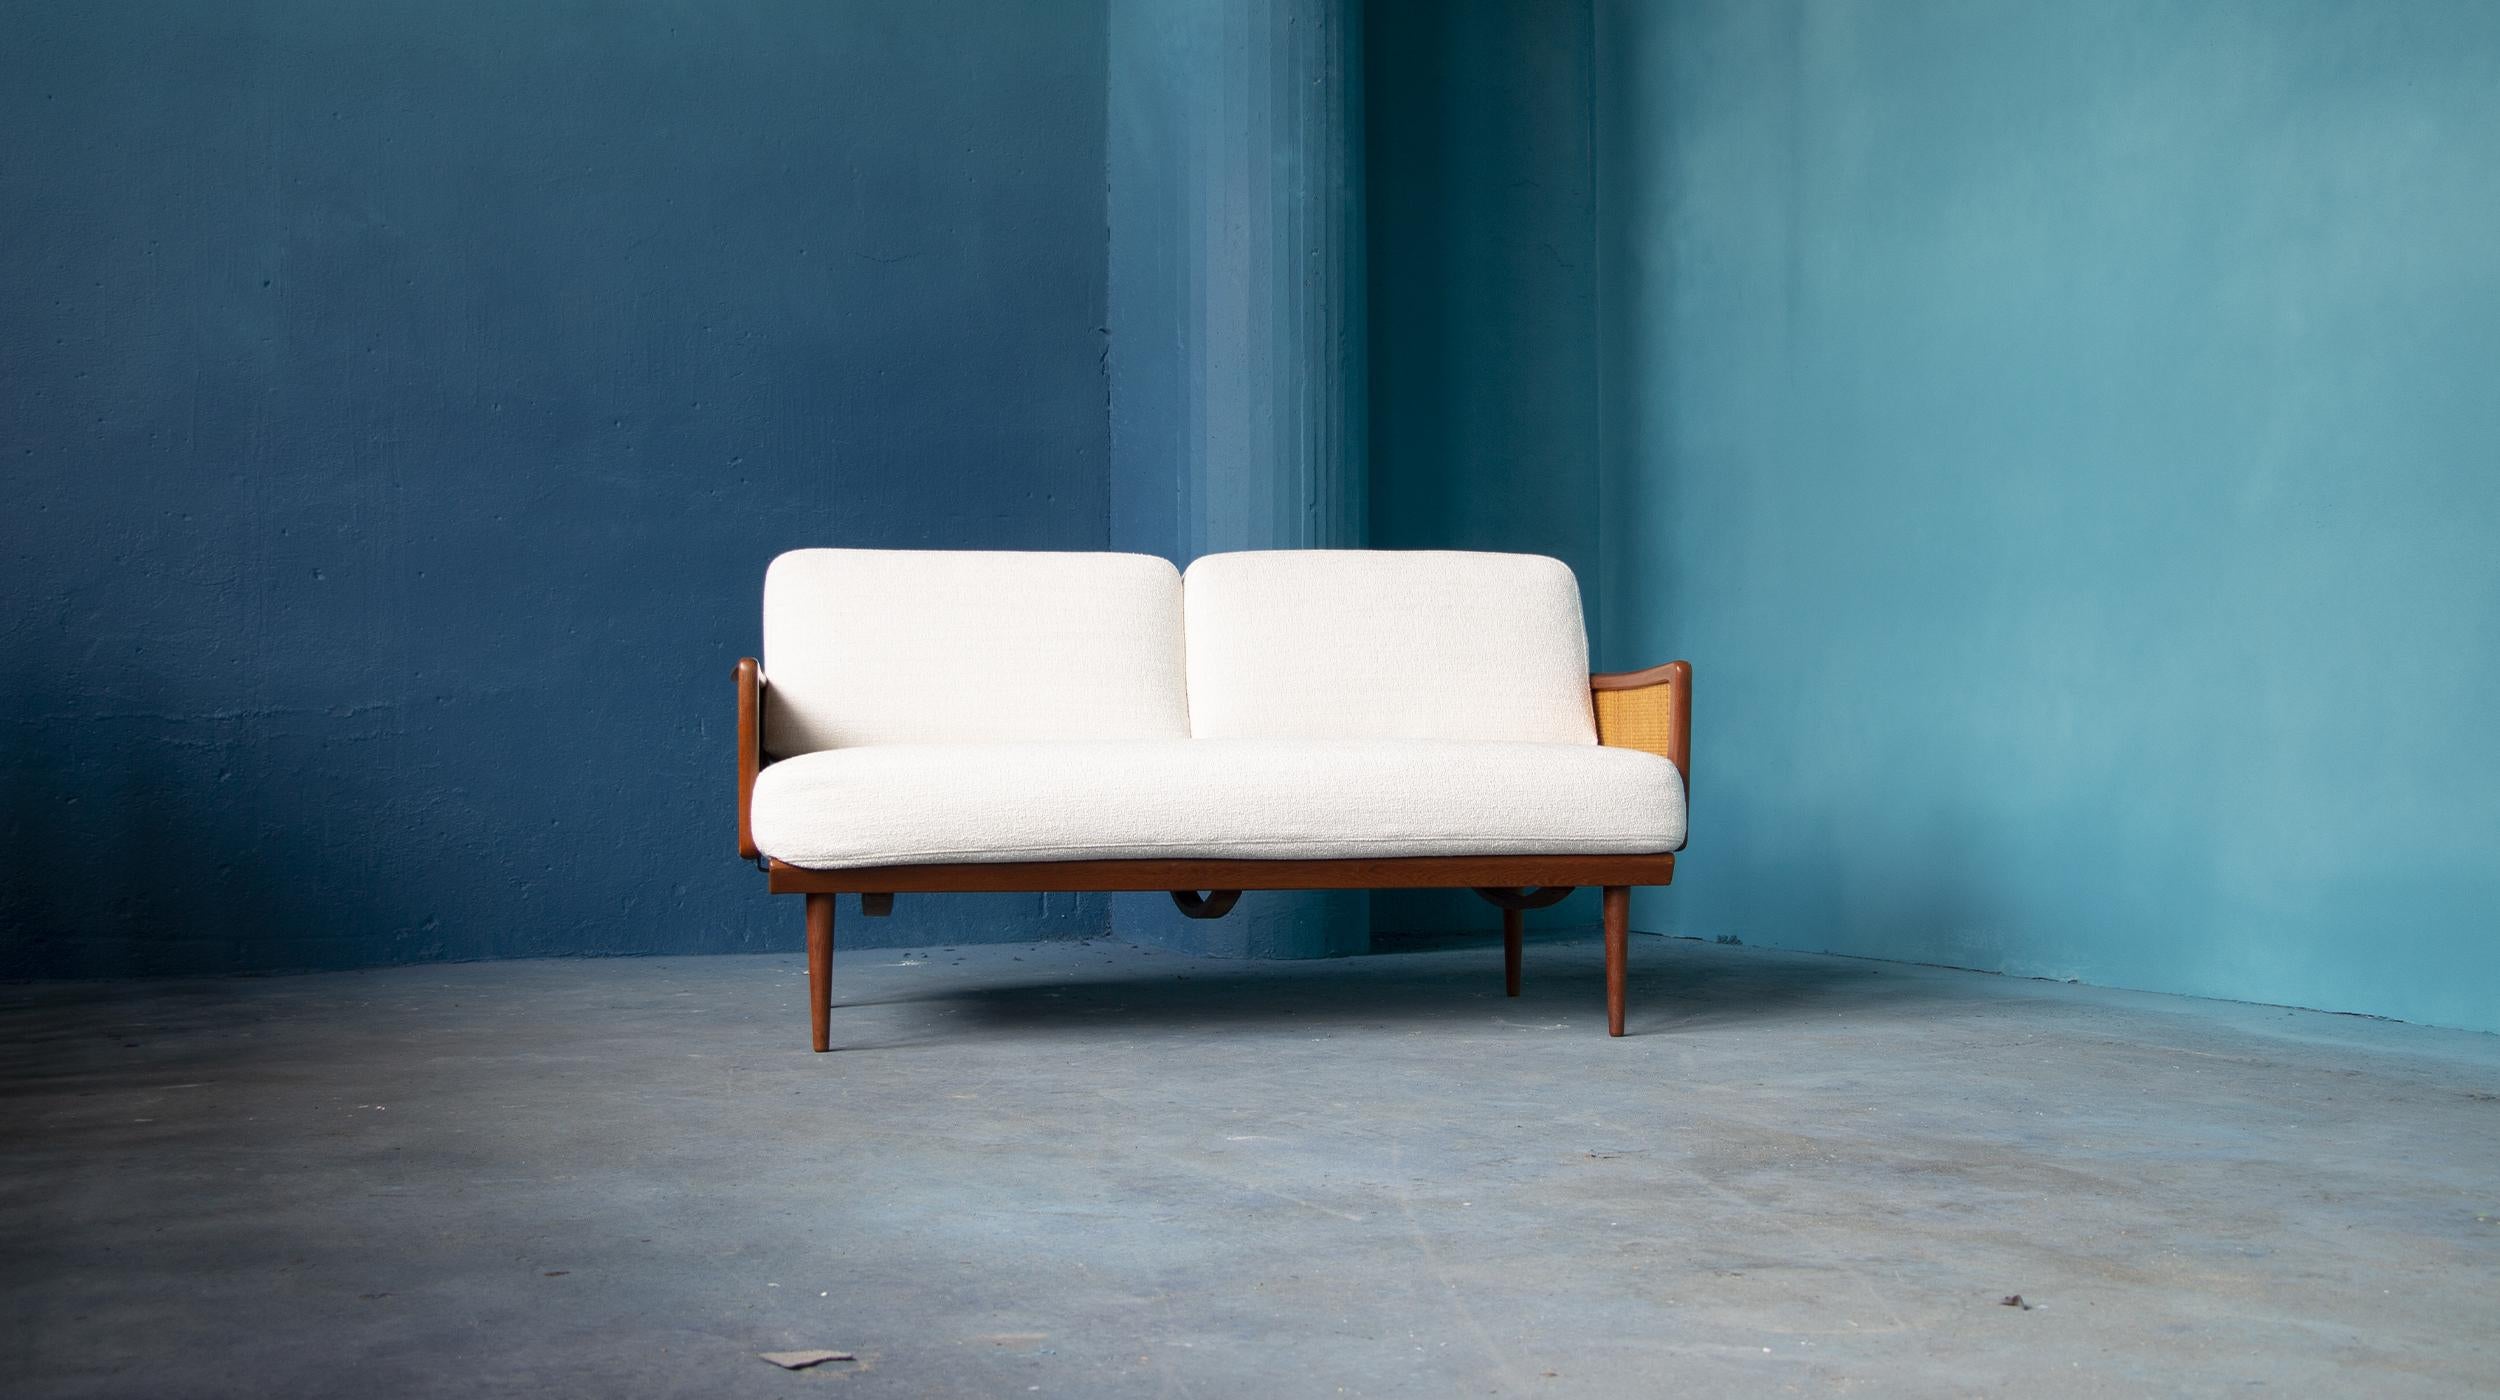 Danish Daybed Model FD 451 by Peter Hvidt and Orla Mølgaard Nielsen for France and Søn in 1956.

Full upholstery restoration by our professional partner specializing in 20th-century furniture. The mattress and cushions have been restored to their